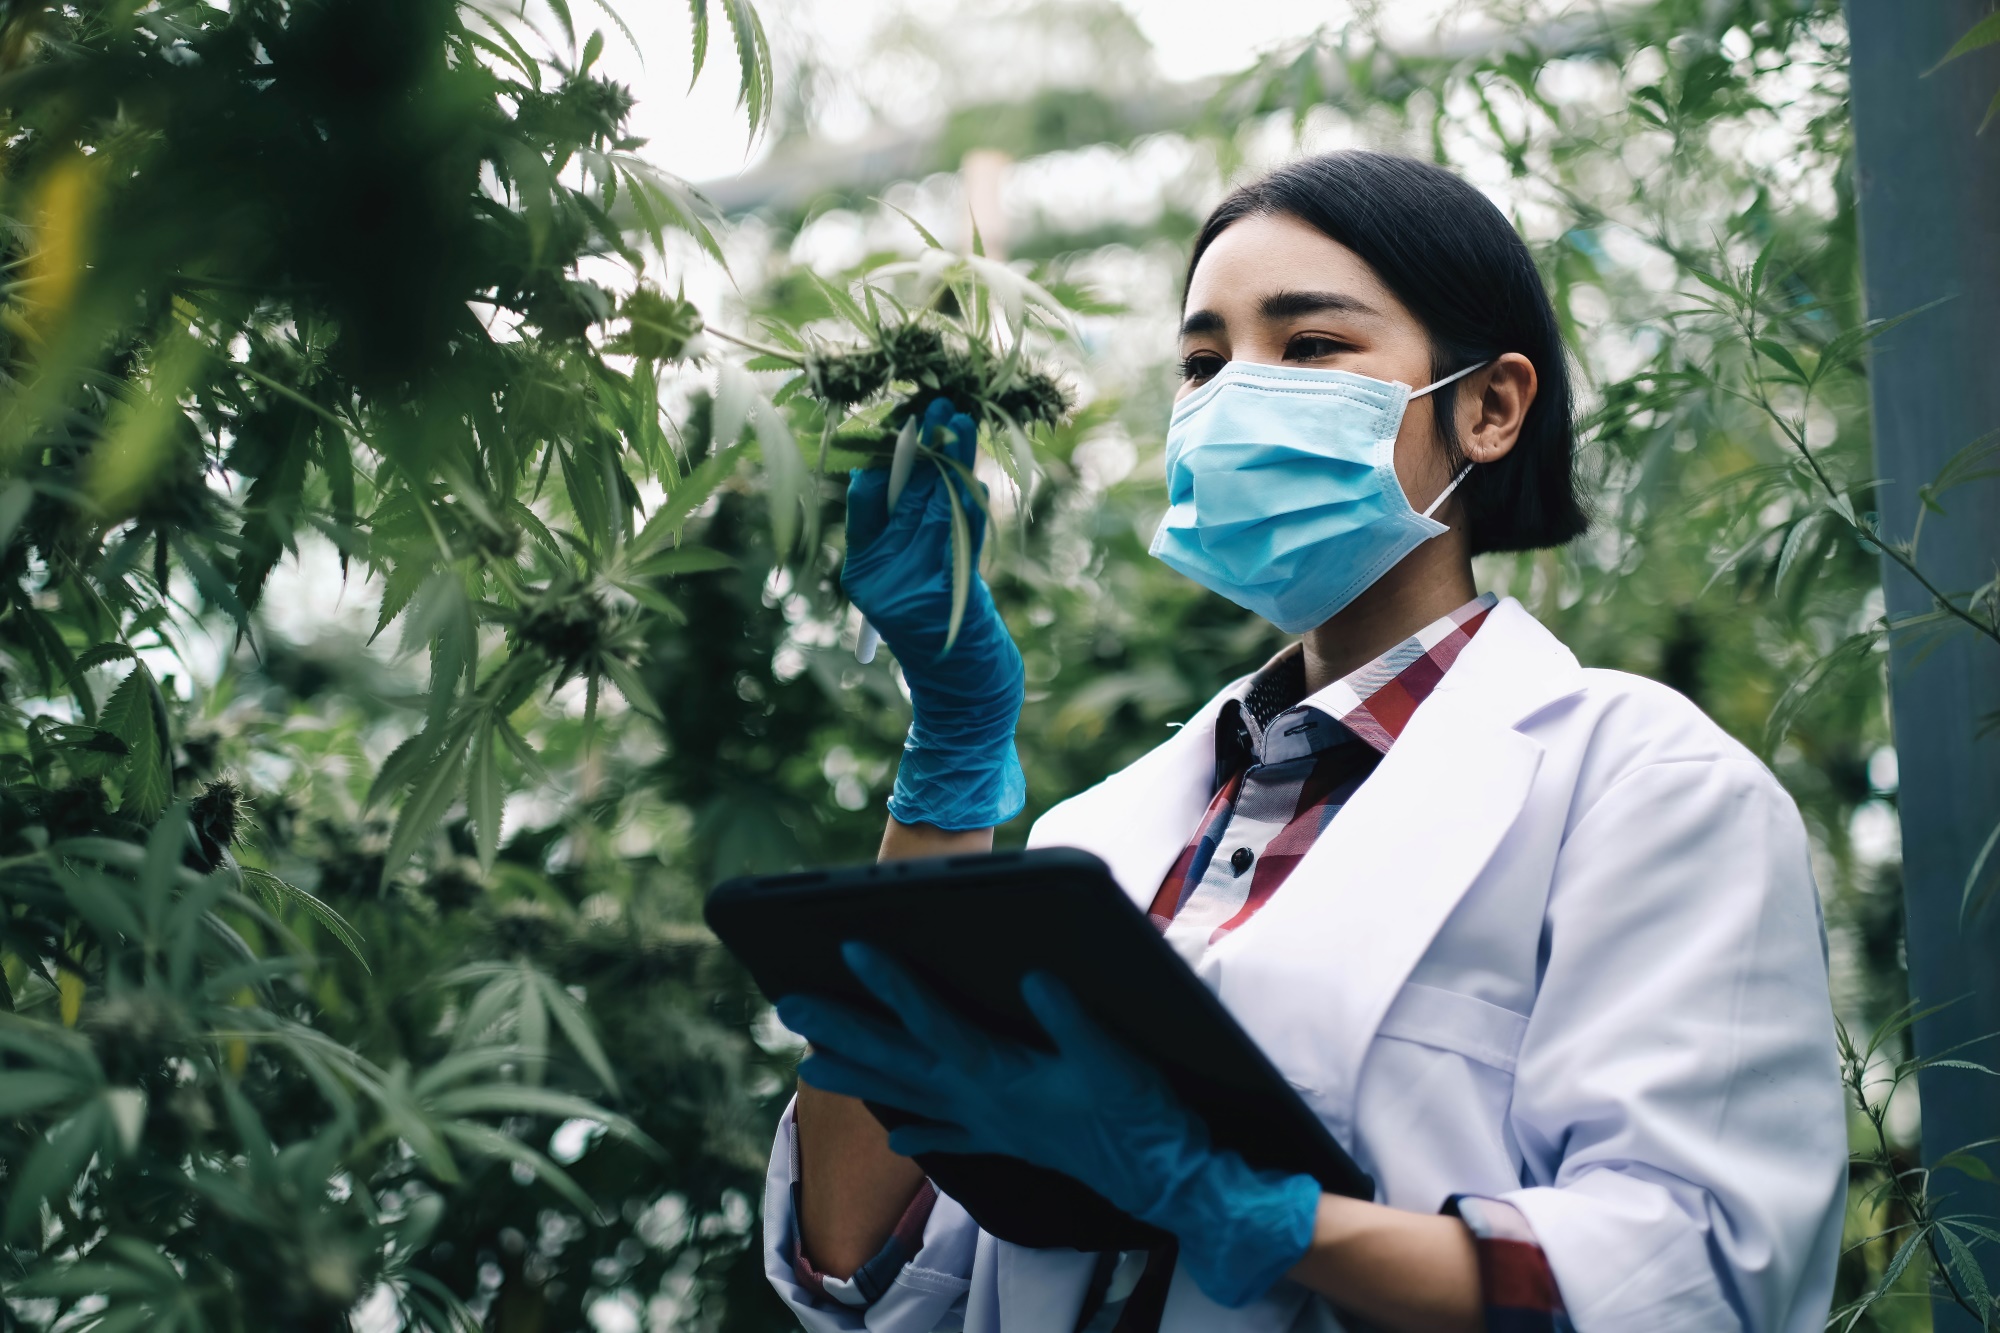 A scientist examines cannabis with a tablet